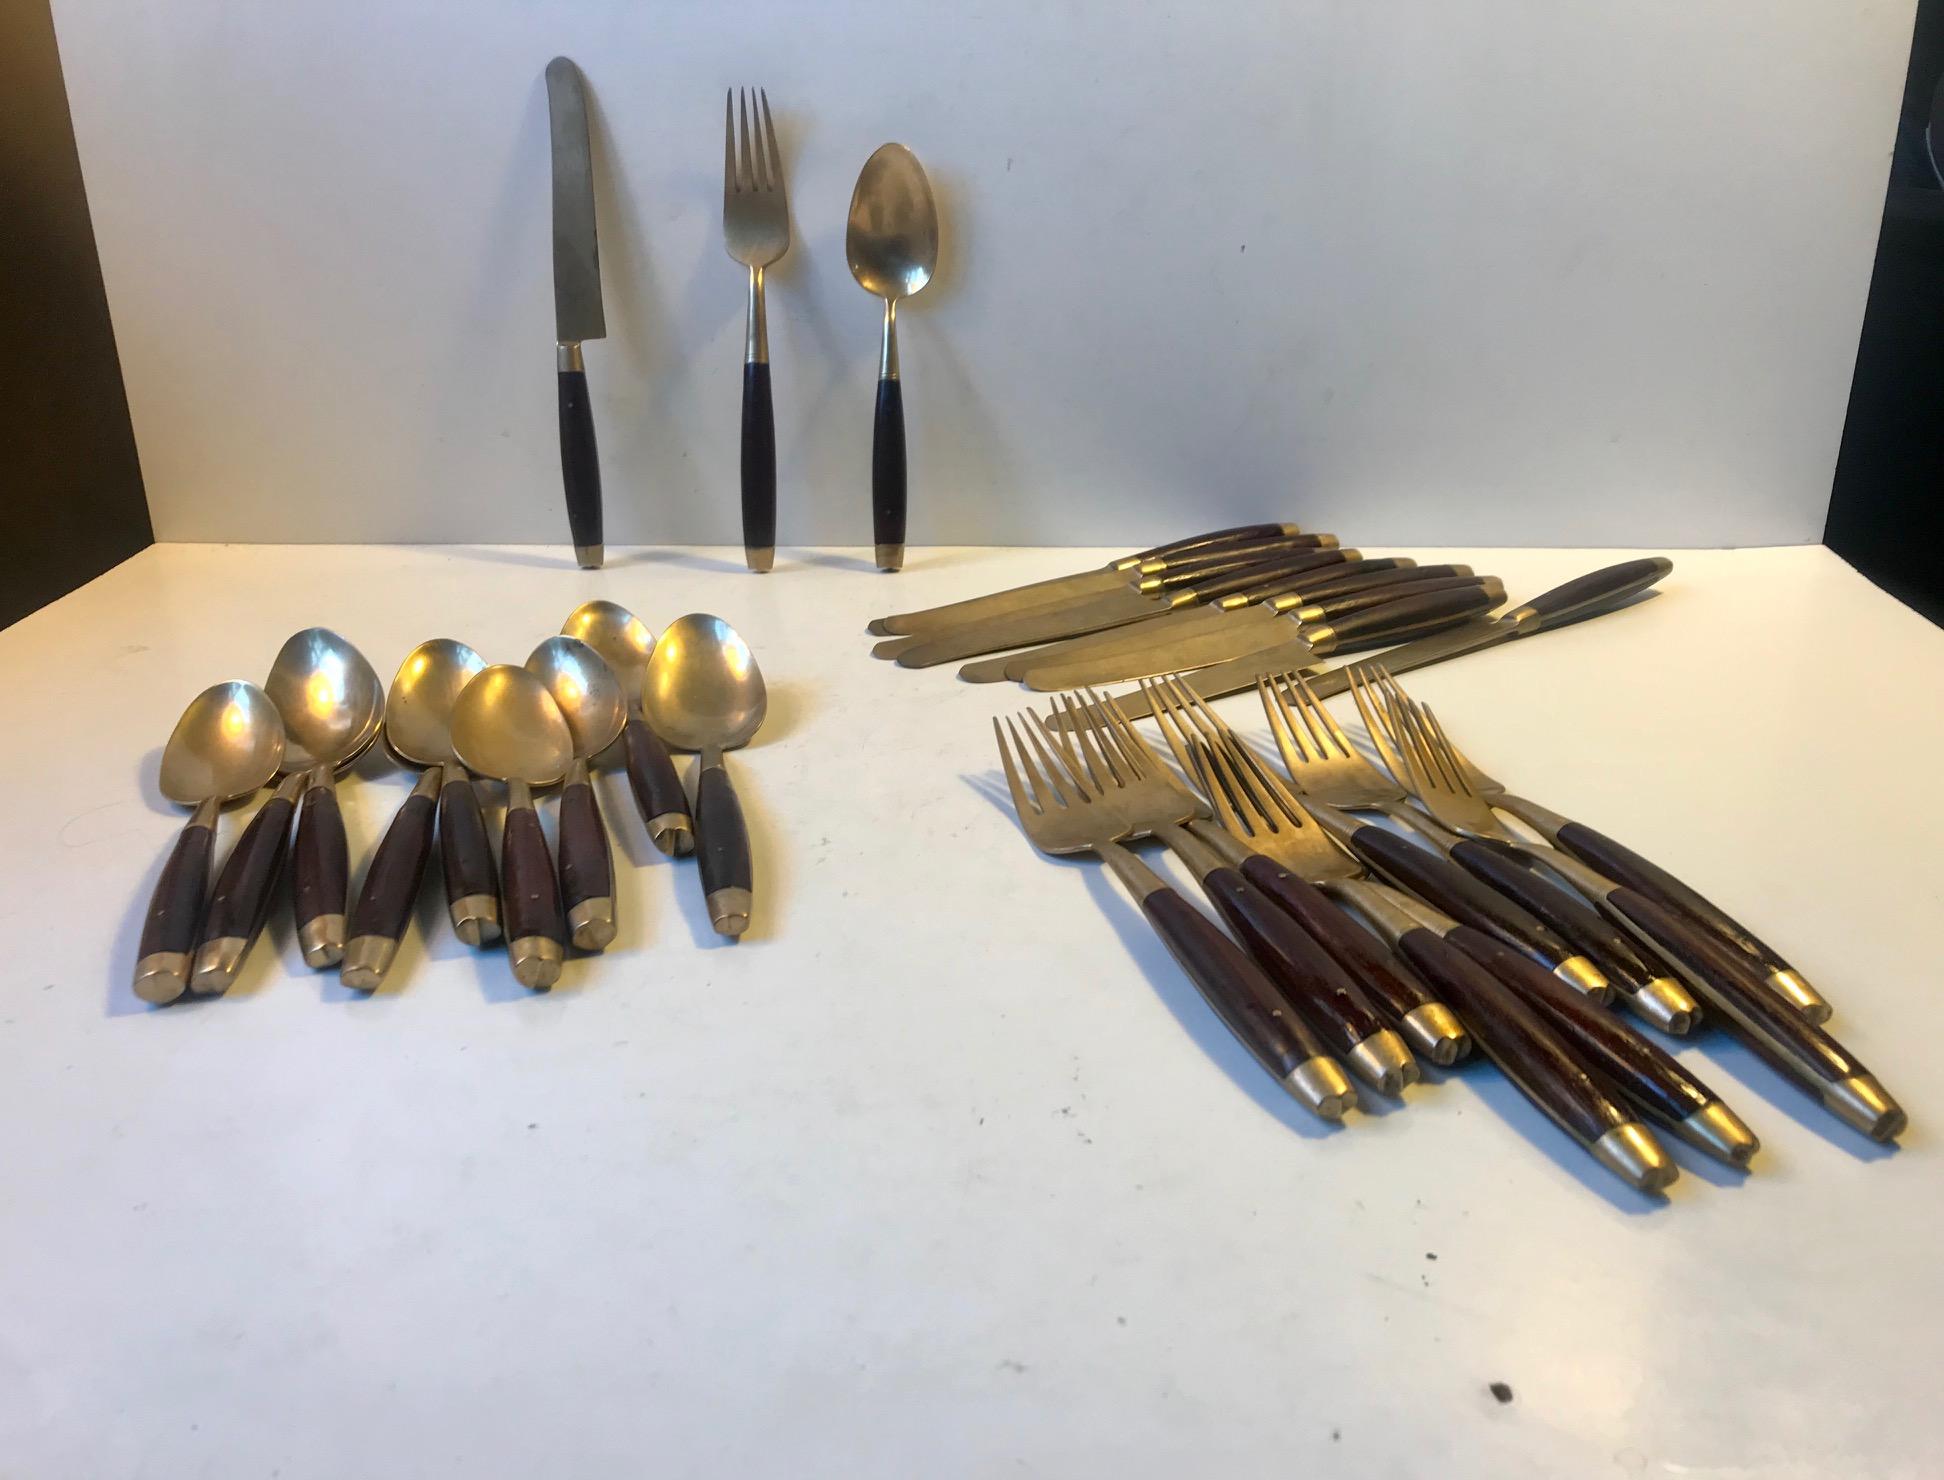 A brass and teak cutlery - flatware set. Its called Thailand and was manufactured by Frigast in Denmark during the late 1950s-early 1960s. The set consists of 10 lunch knives, 10 spoons and 10 forks. The knives and forks measures 20 cm in length -